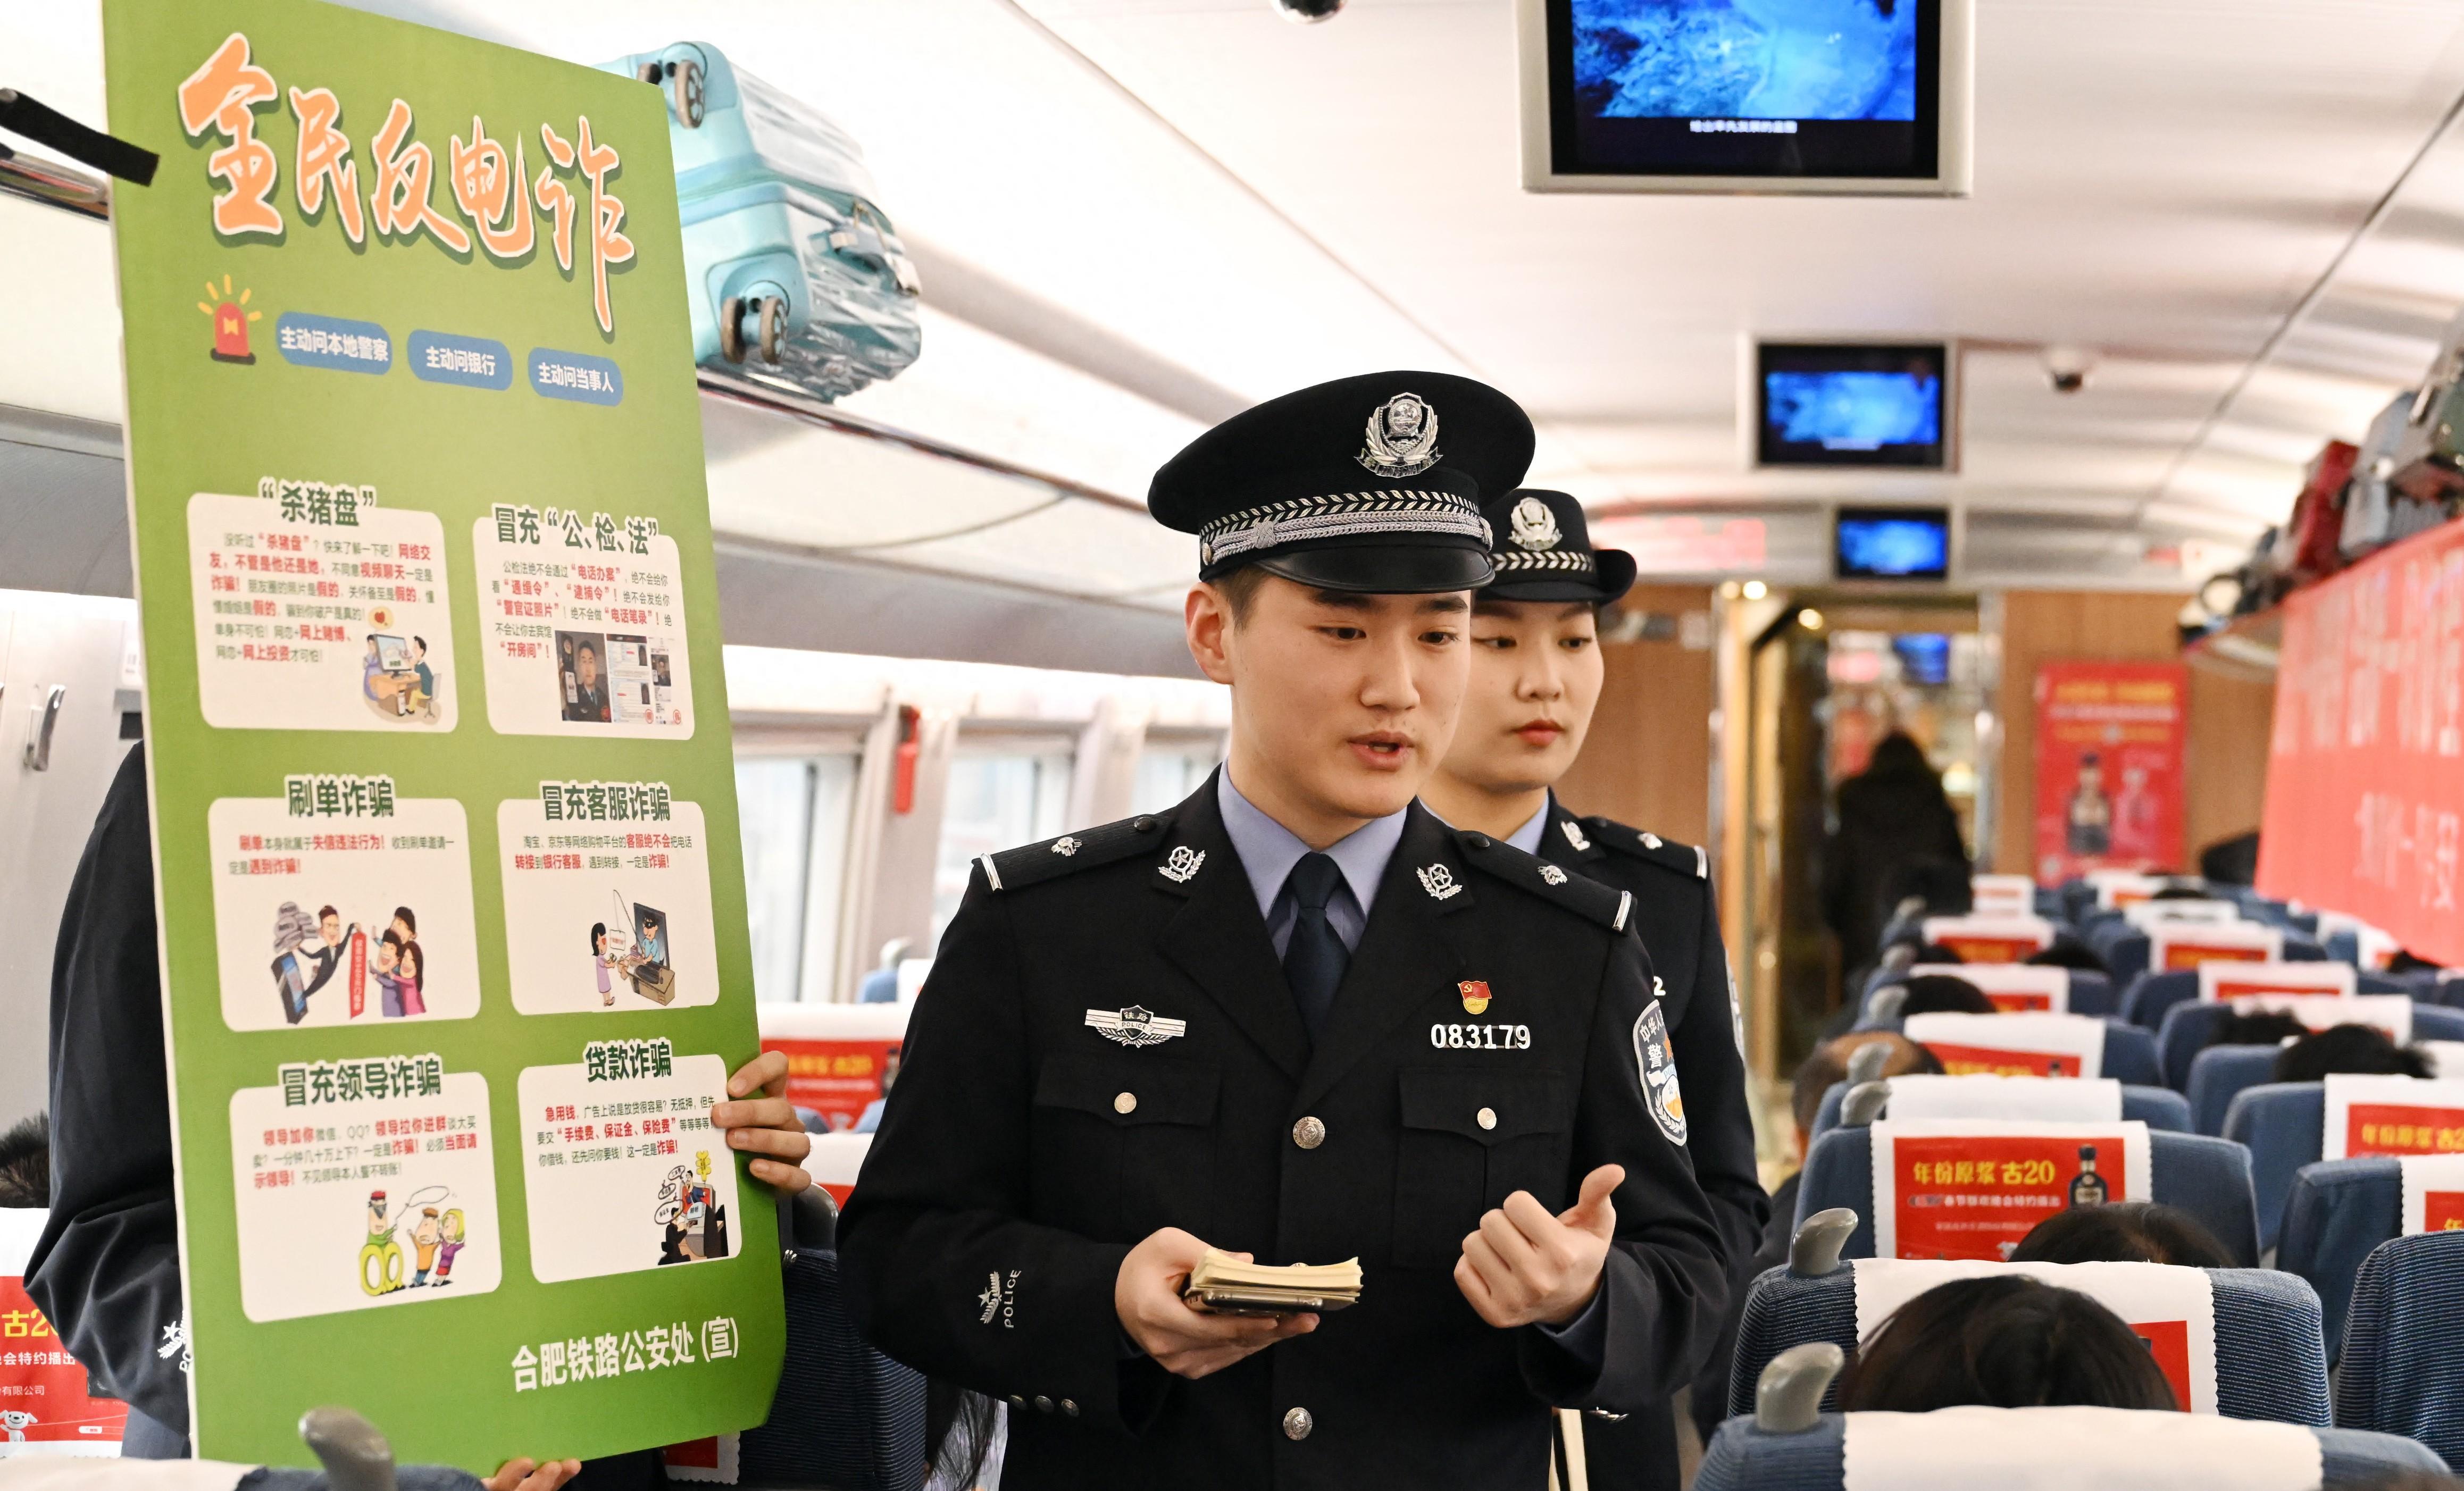 Police officers share information on telecom fraud with travelers on a high-speed train. /China Media Group